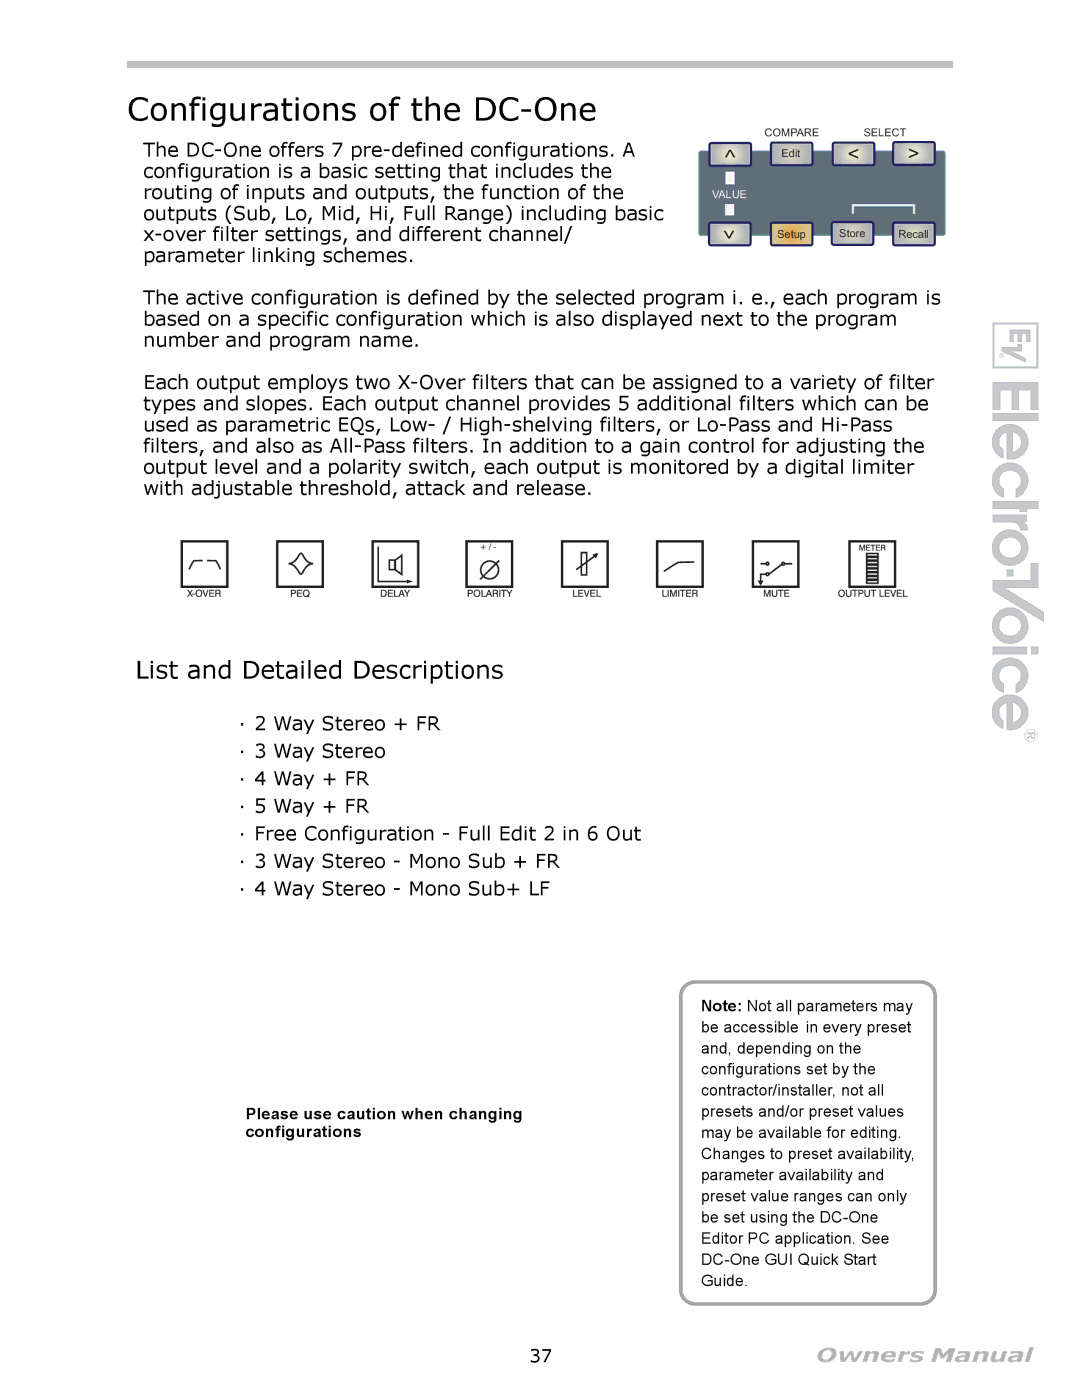 Electro-Voice Speaker System owner manual Configurations of the DC-One, List and Detailed Descriptions 